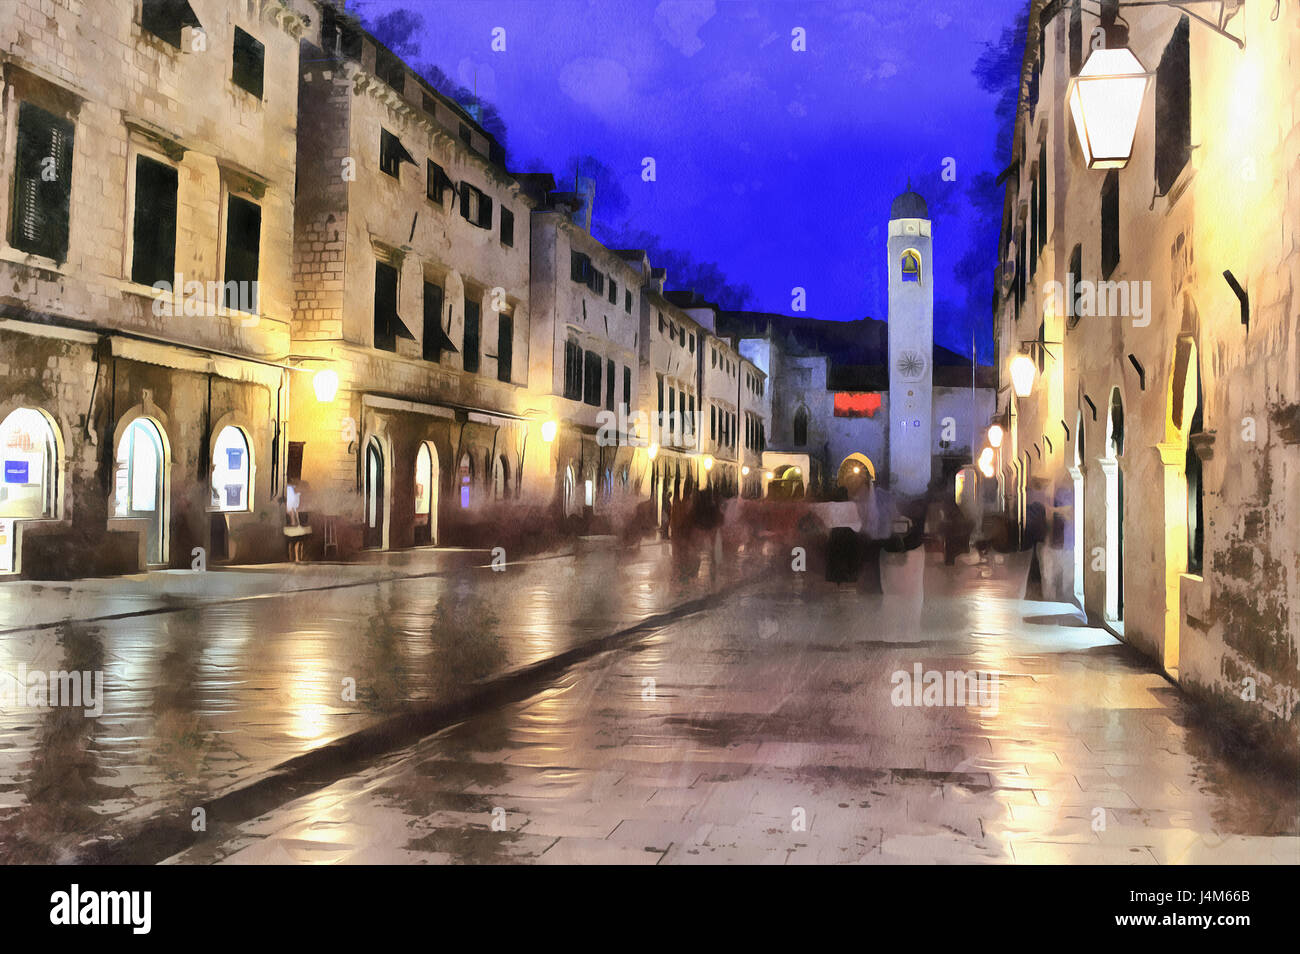 Colorful painting of old town in the evening,  Dubrovnik, Croatia Stock Photo